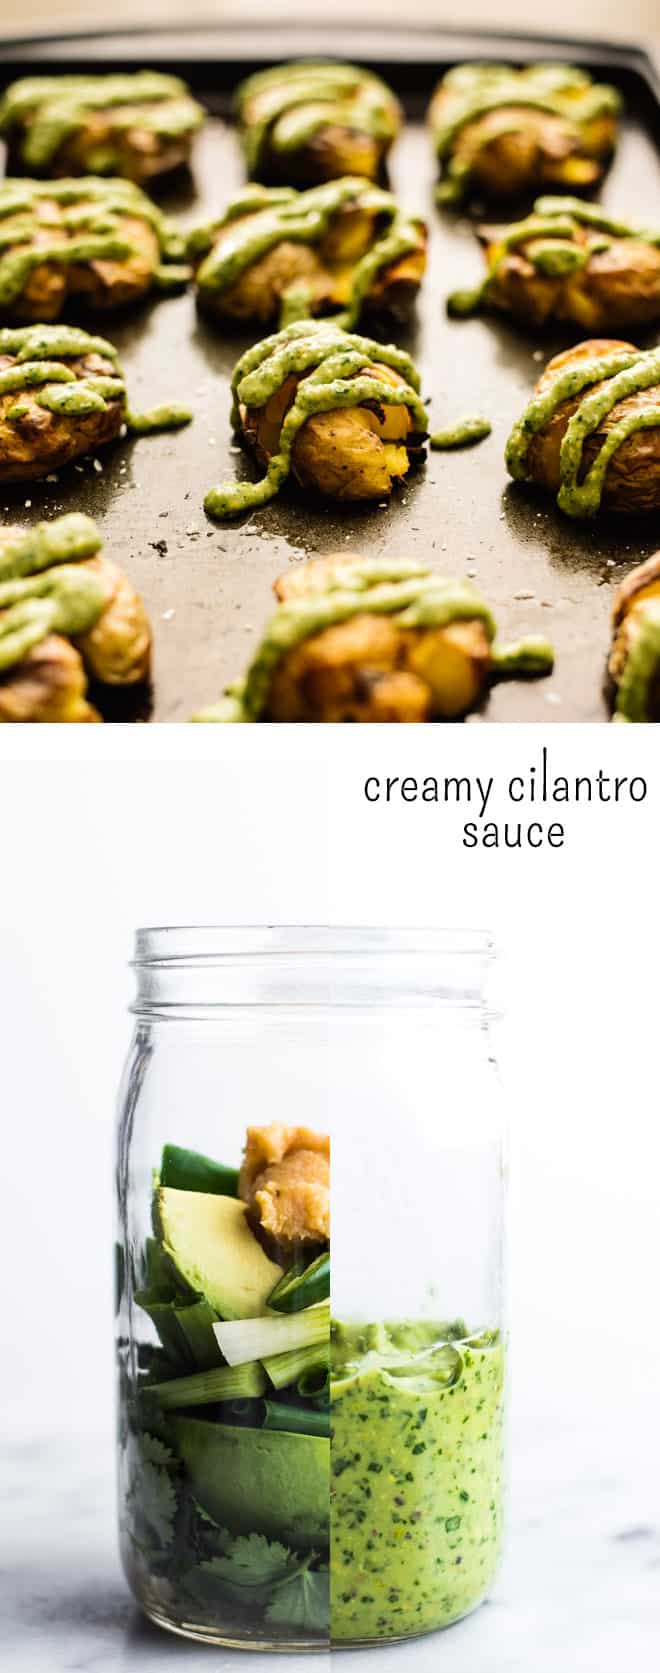 Versatile Creamy Cilantro Sauce - an easy, tasty sauce that only takes 5 minutes to make, and it goes well with everything! by Lisa Lin of clube.futebolmilionario.com